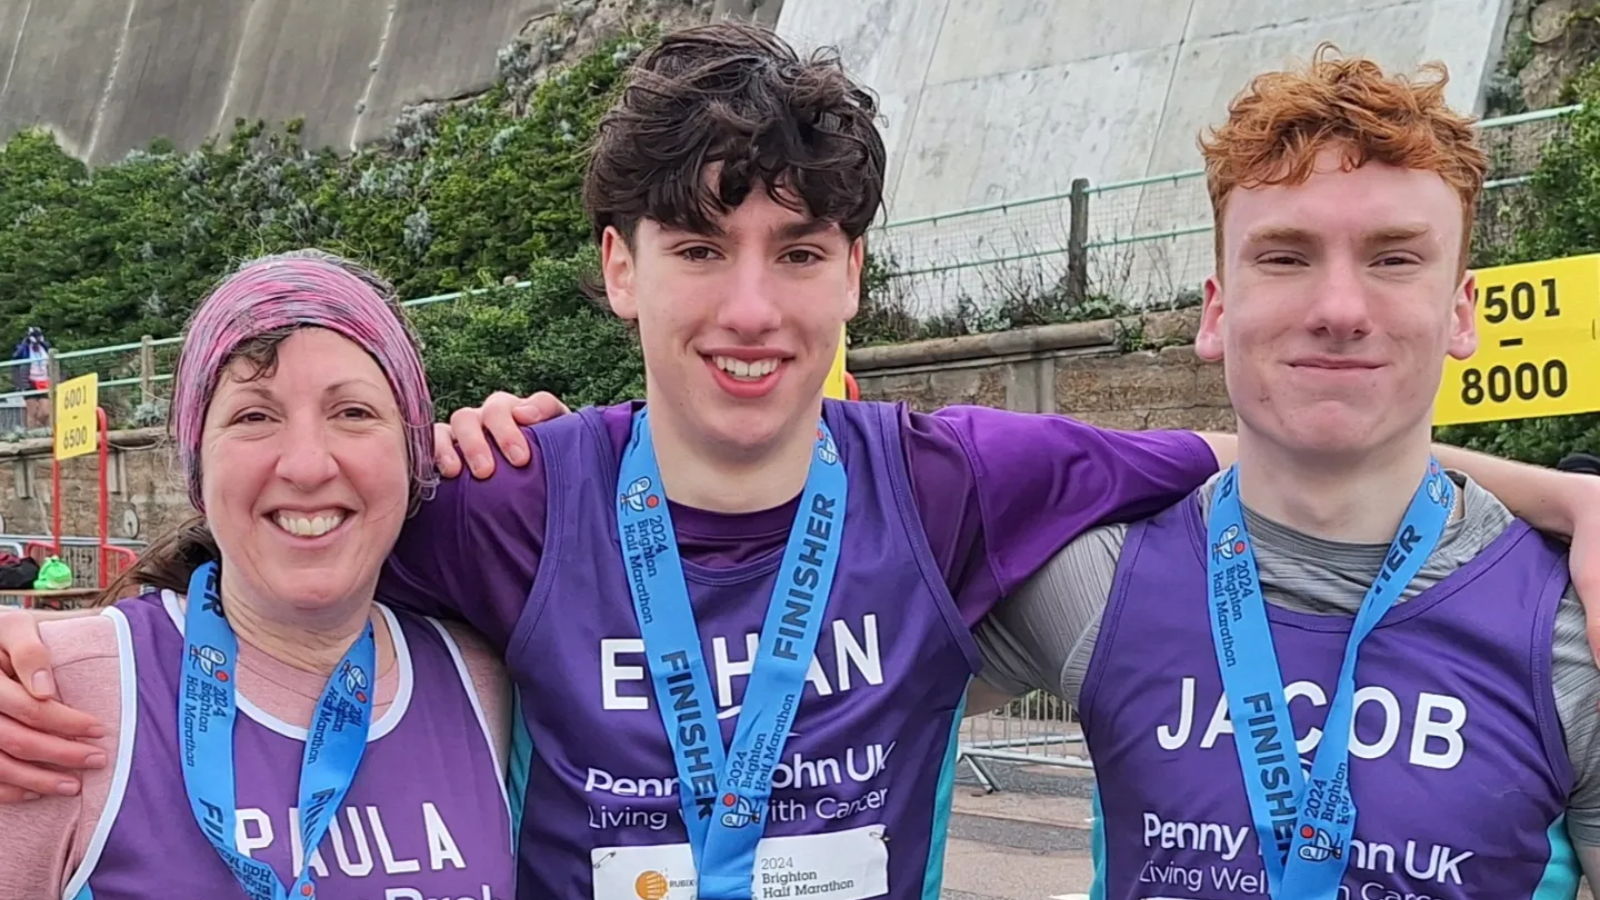 Photo of a woman and two young boys with arms around each other smiling wearing medals after running the Brighton Half Marathon.